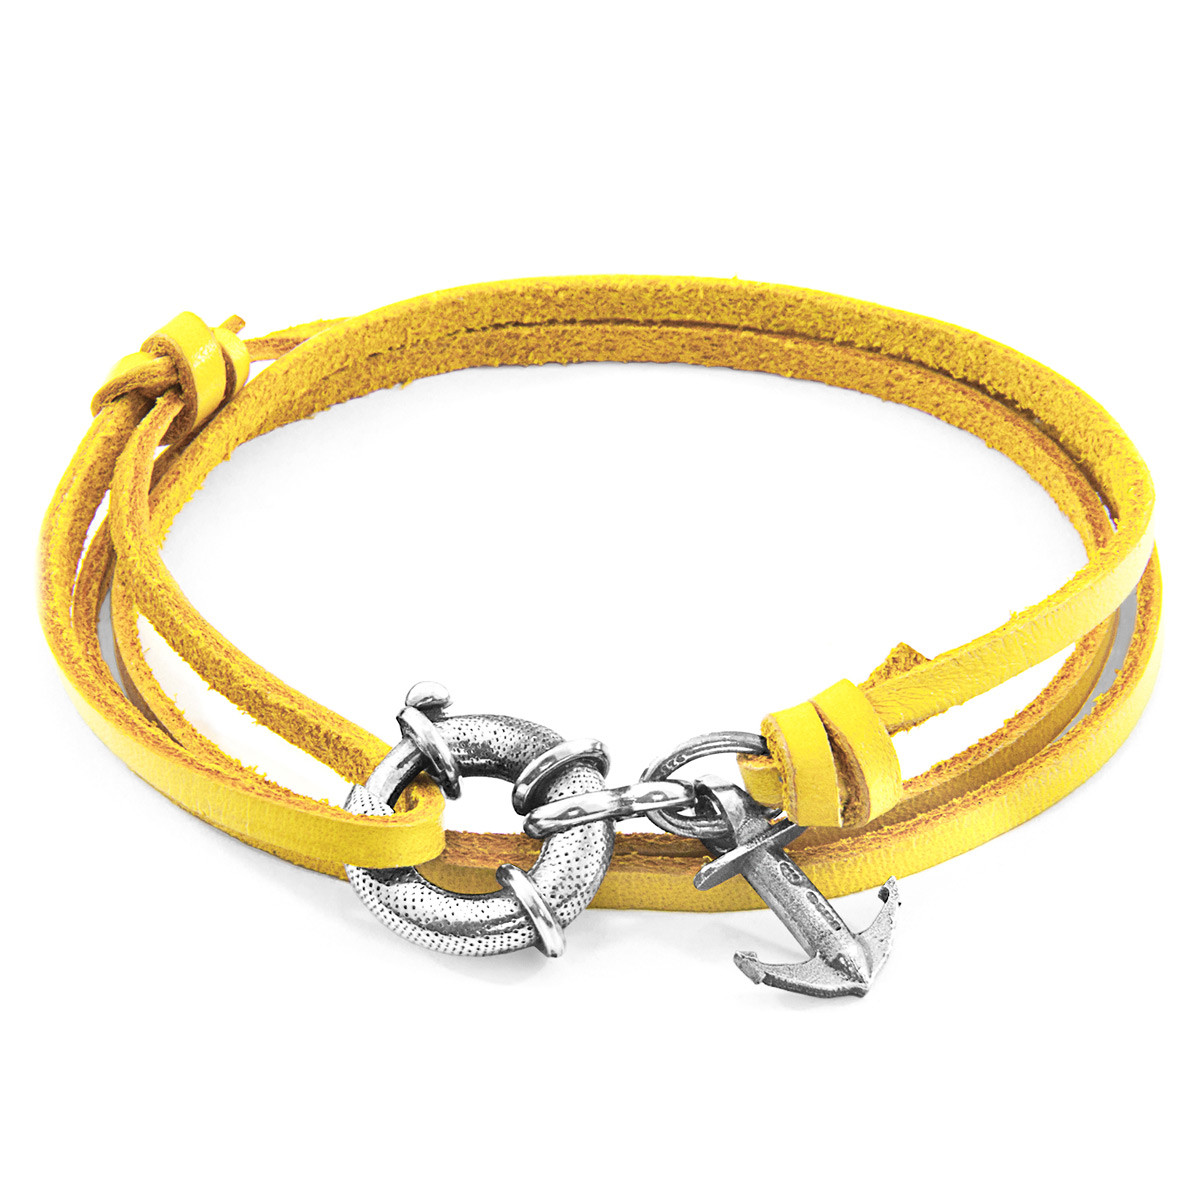 Anchor & Crew Mustard Yellow Clyde Silver and Flat Leather Bracelet